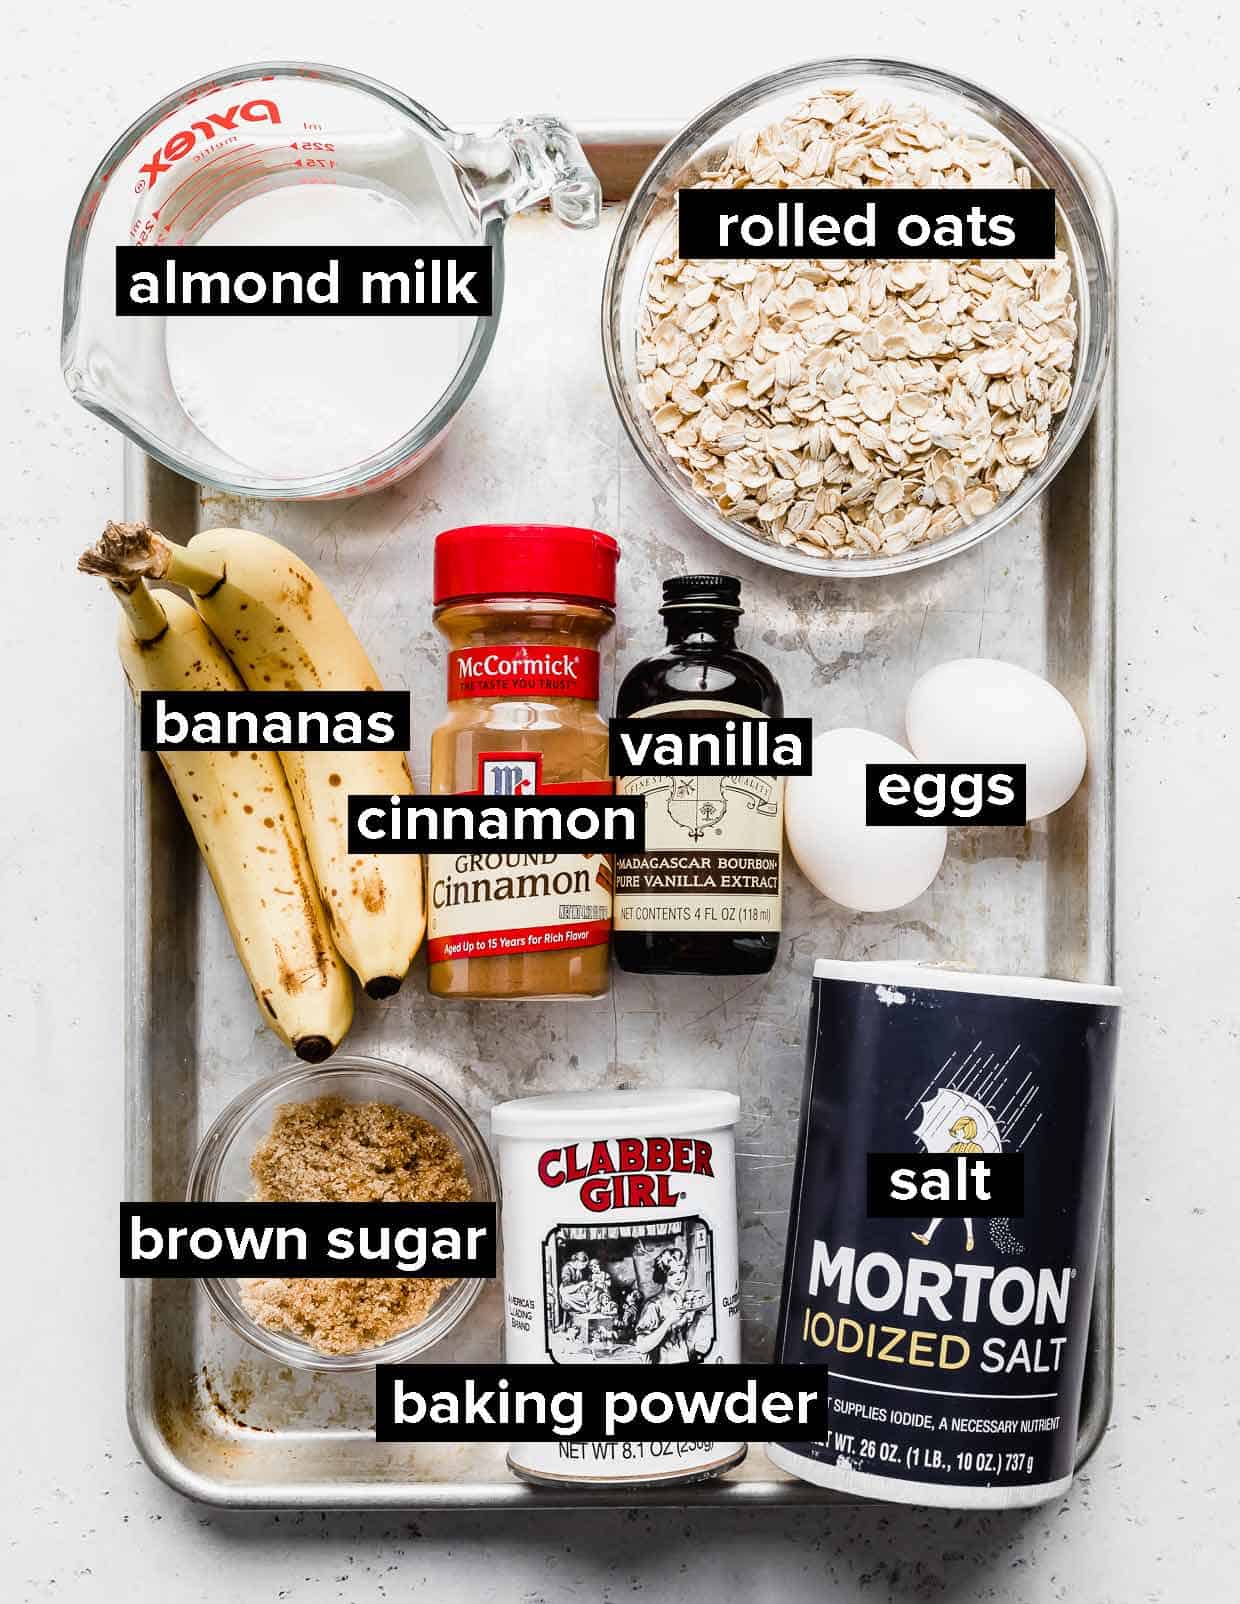 Ingredients used to make banana oatmeal pancakes on a silver baking tray.